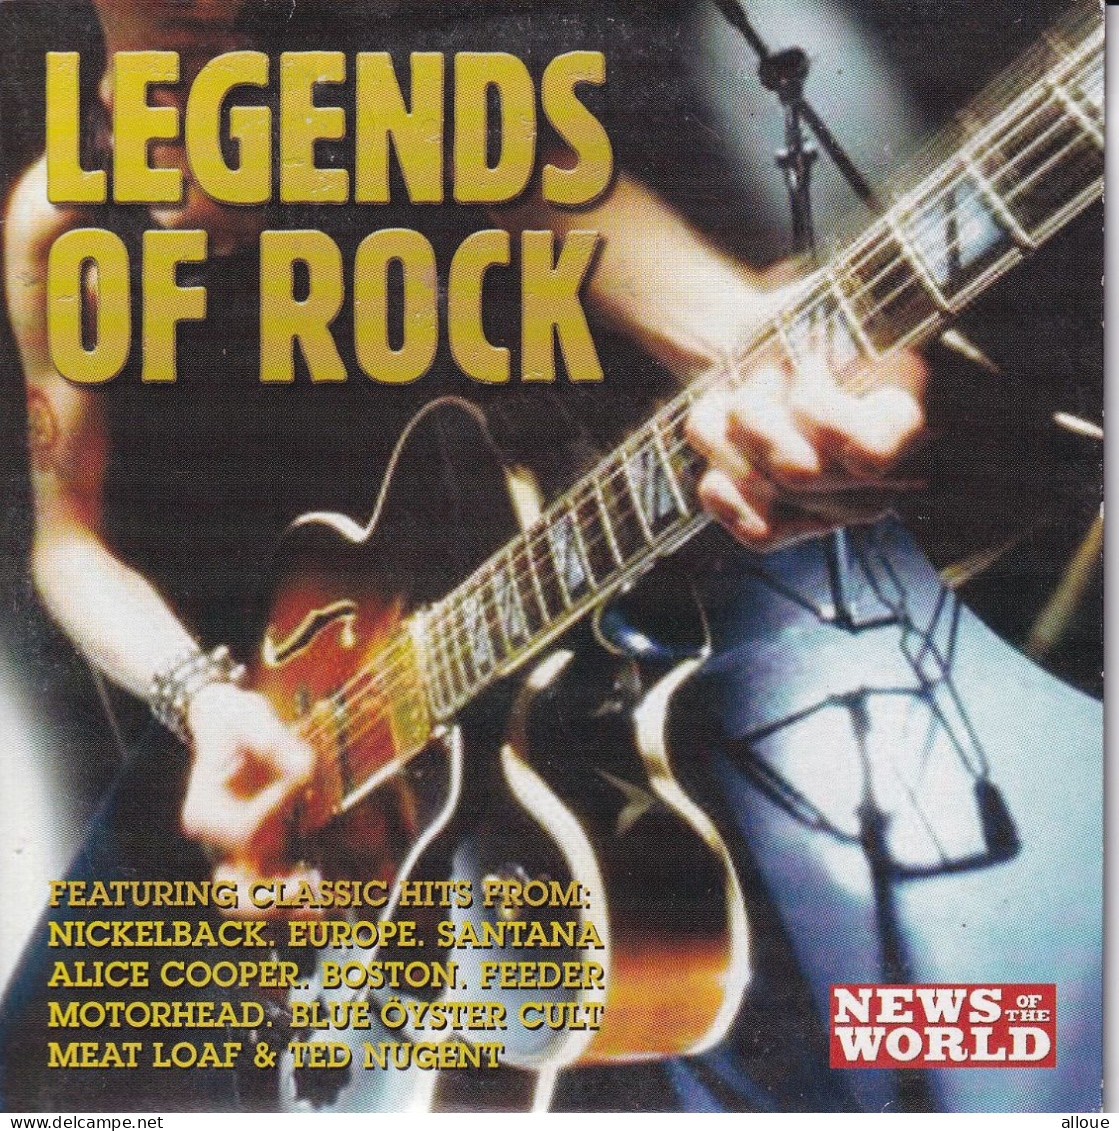 LEGENDS OF ROCK - CD NEWS OF THE WORLD -POCHETTE CARTON 10TRACK - MEAT LOAF-ALICE COOPER-EUROPE-MOTORHEAD - Altri - Inglese